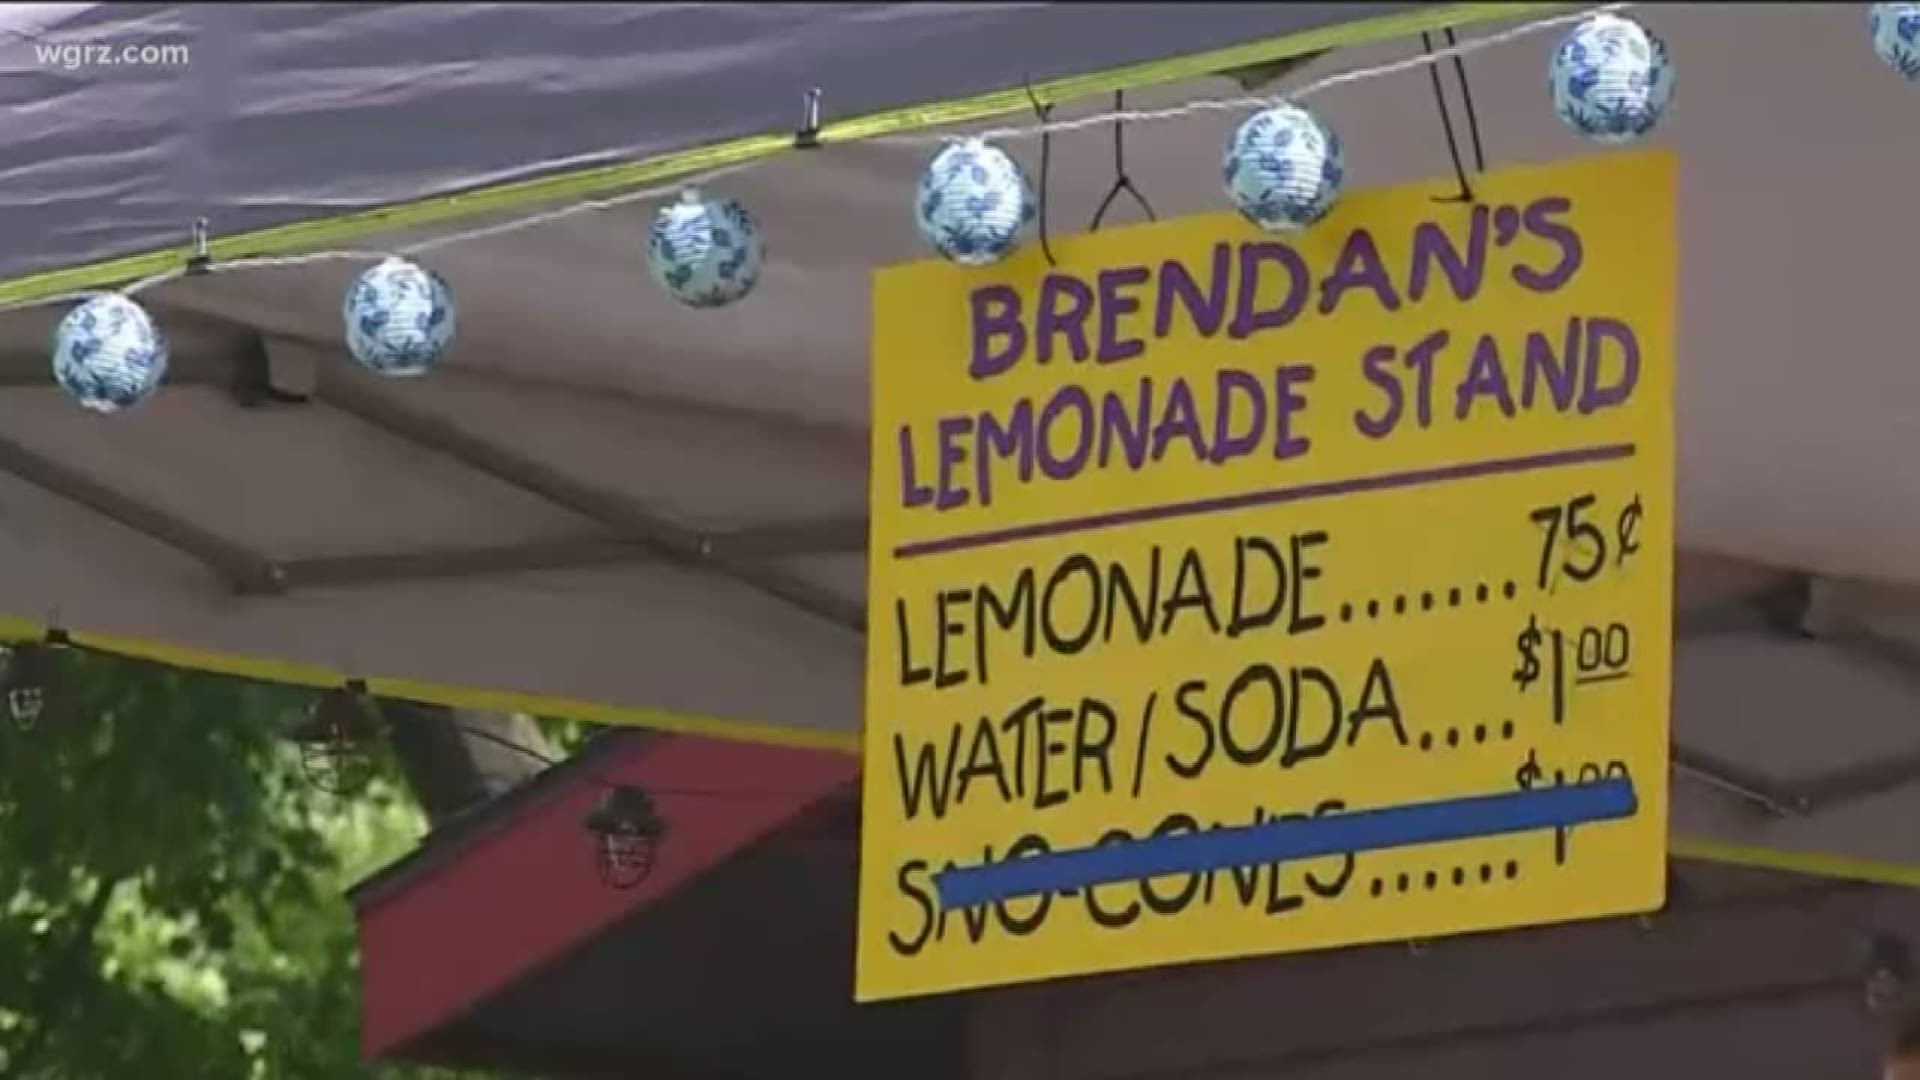 NY DOH Apologizes For Lemonade Stand